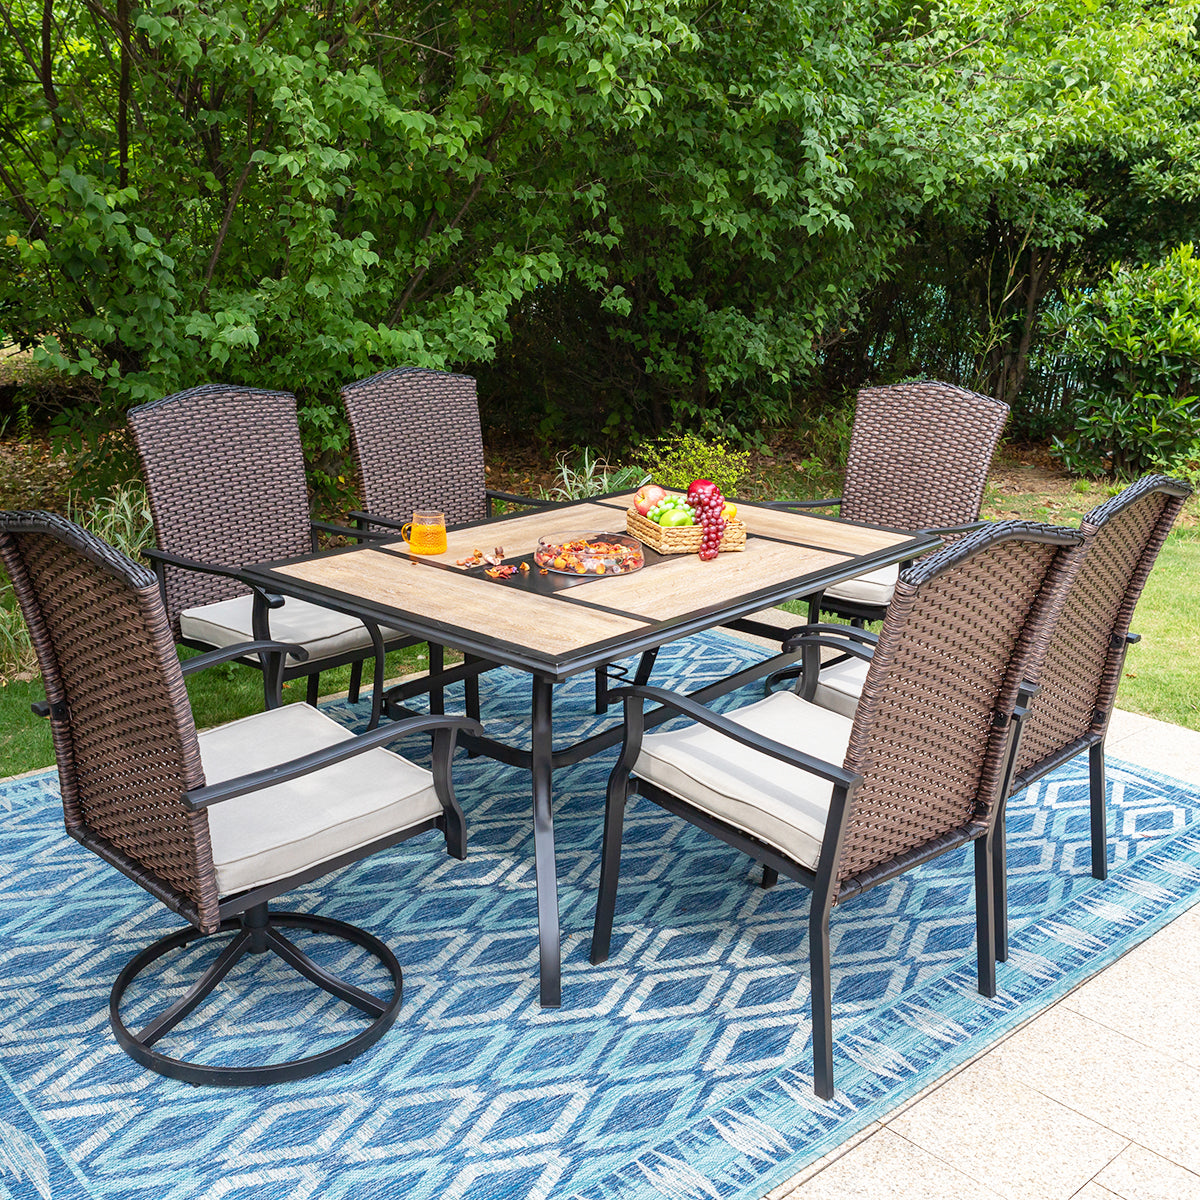 Sophia & William 7-Piece Patio Dining Set Wood-look Stitching Geometric Patterns Table & Rattan Chairs